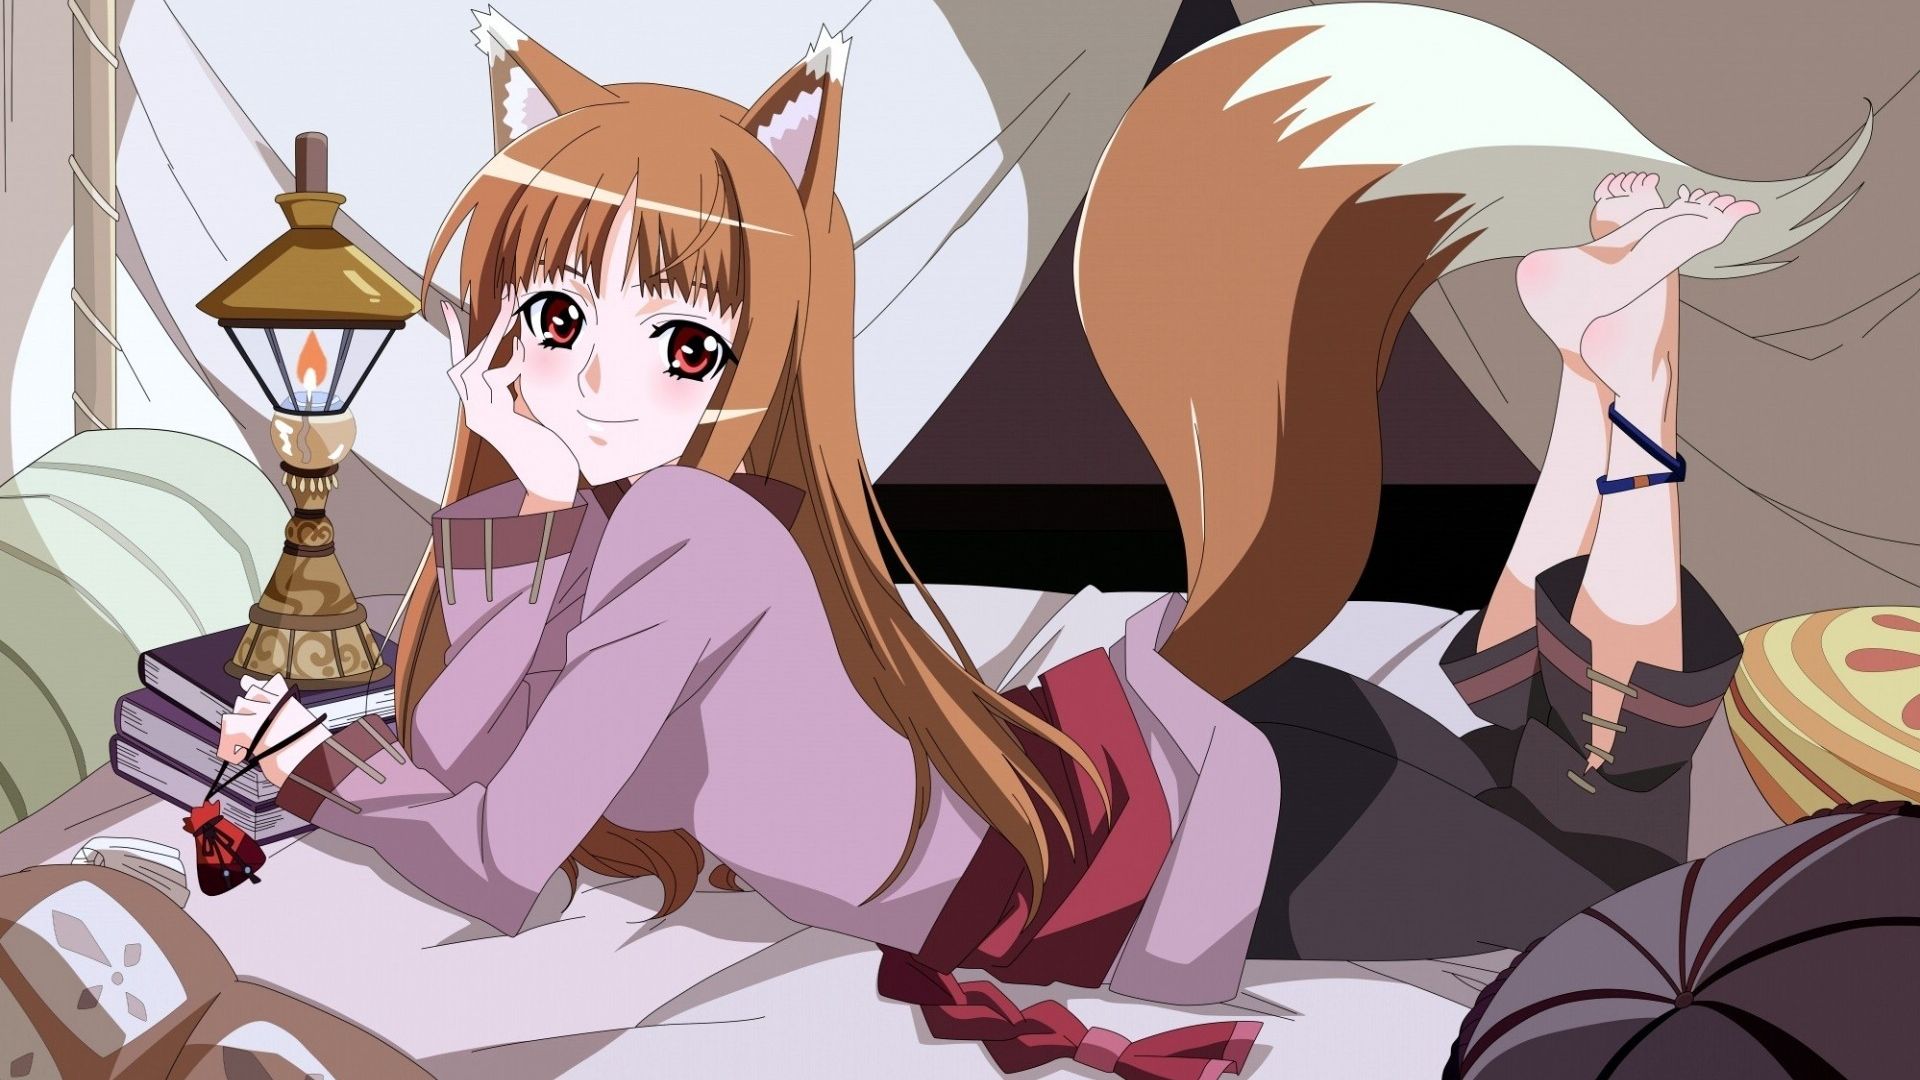 Wallpaper Spice and wolf anime girl